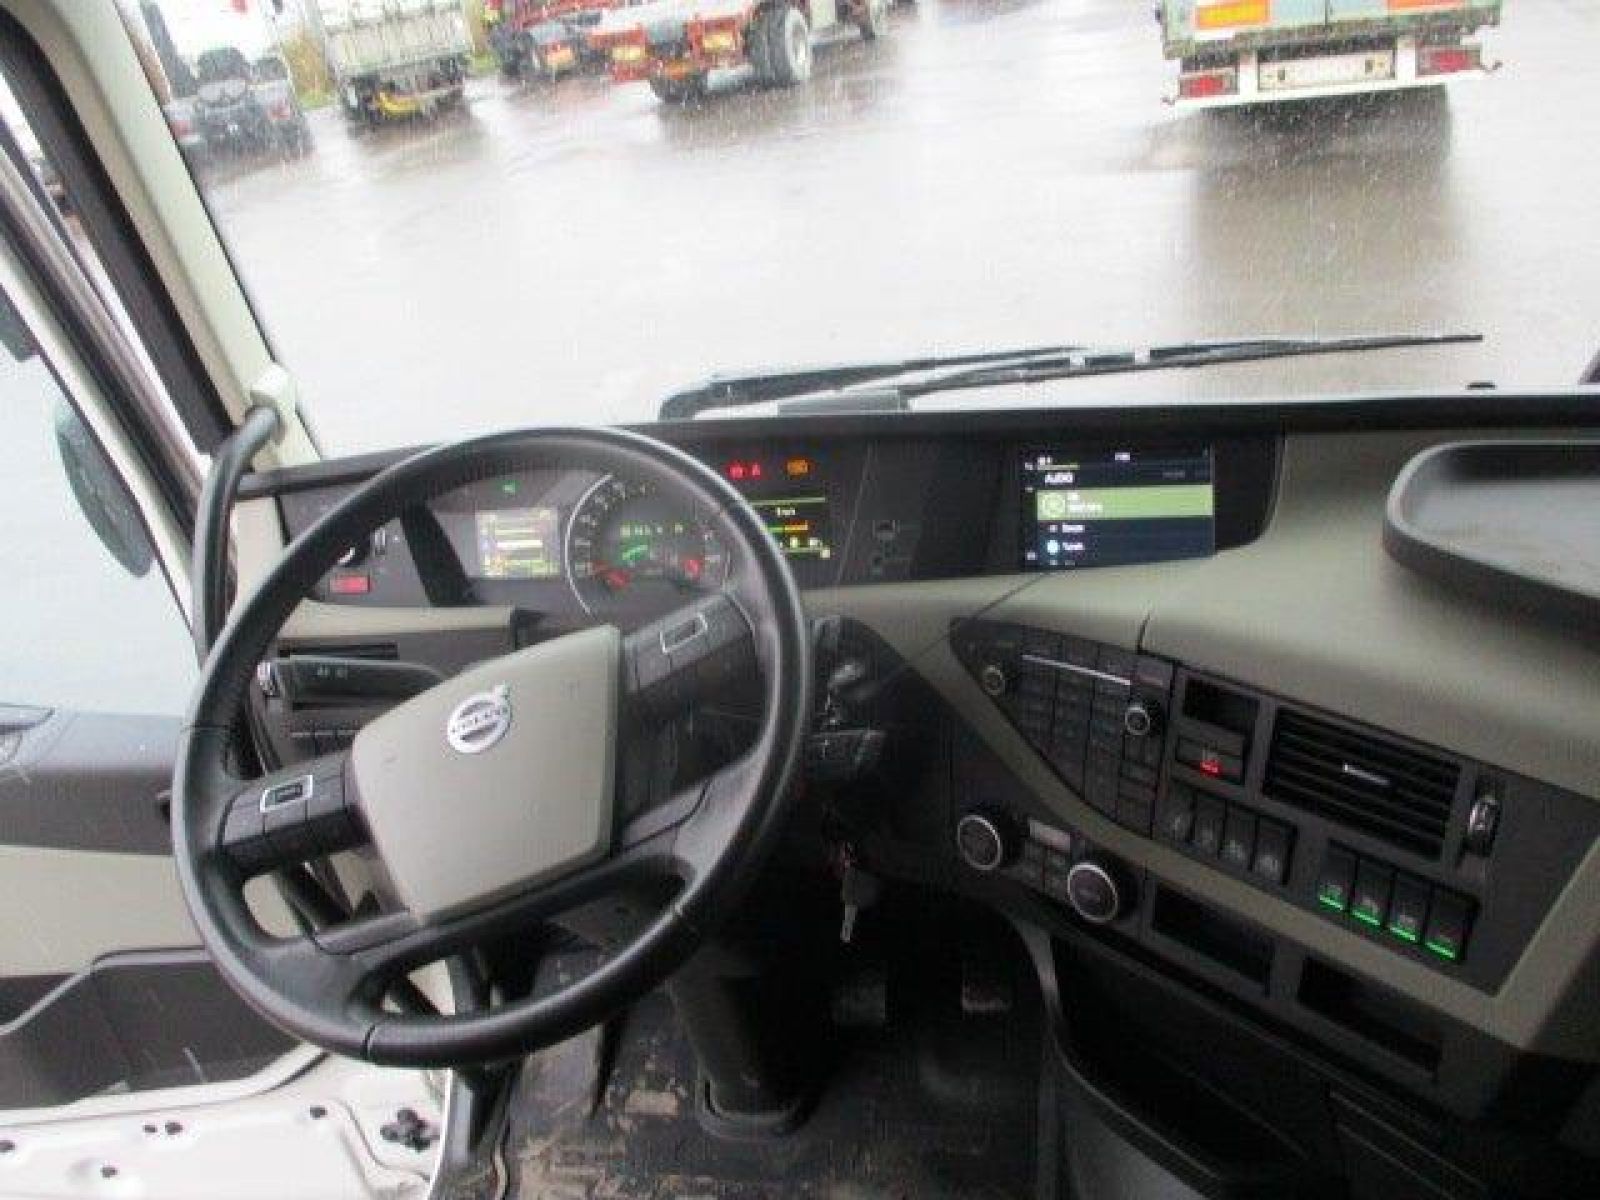 Vente occasion  Tracteur - VOLVO FH 500  Tracteur (Belgique - Europe) - Houffalize Trading s.a.